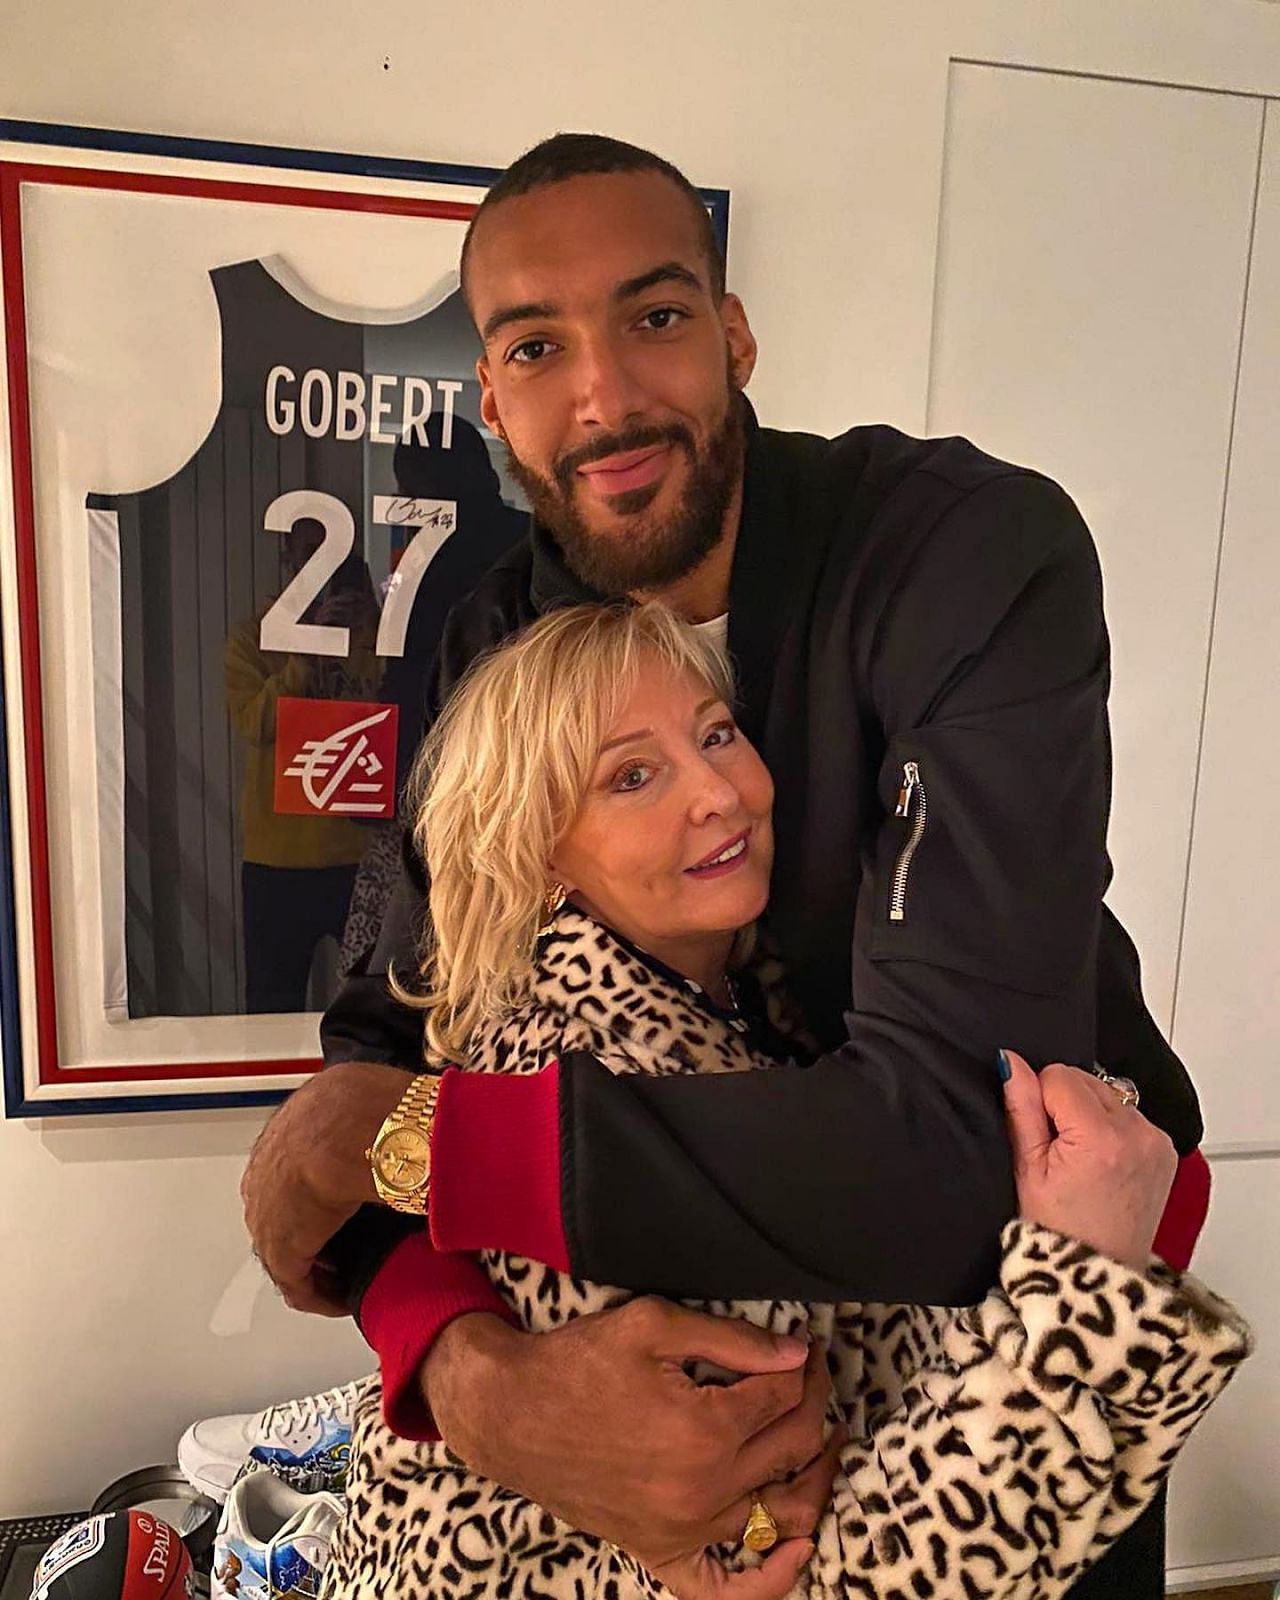 Who are Rudy Gobert Parents, Rudy Bourgarel and Corinne Gobert?